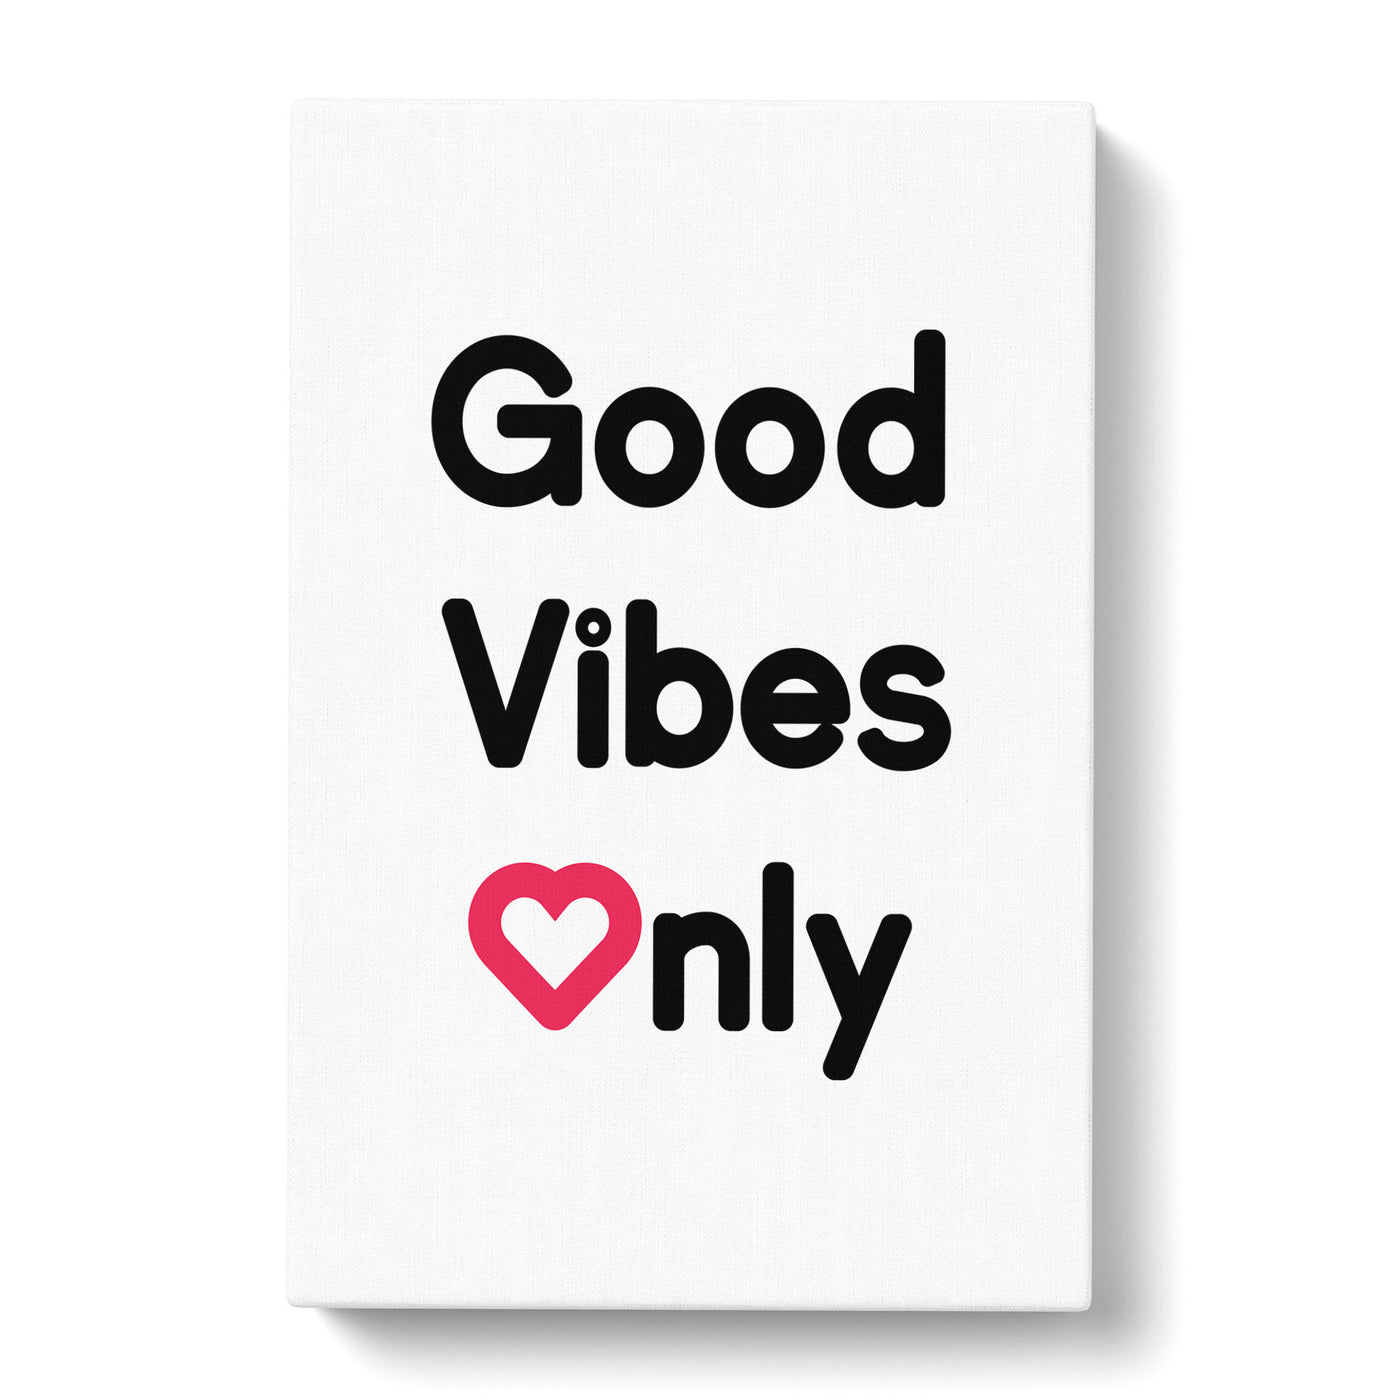 Good Vibes Only Typography Canvas Print Main Image